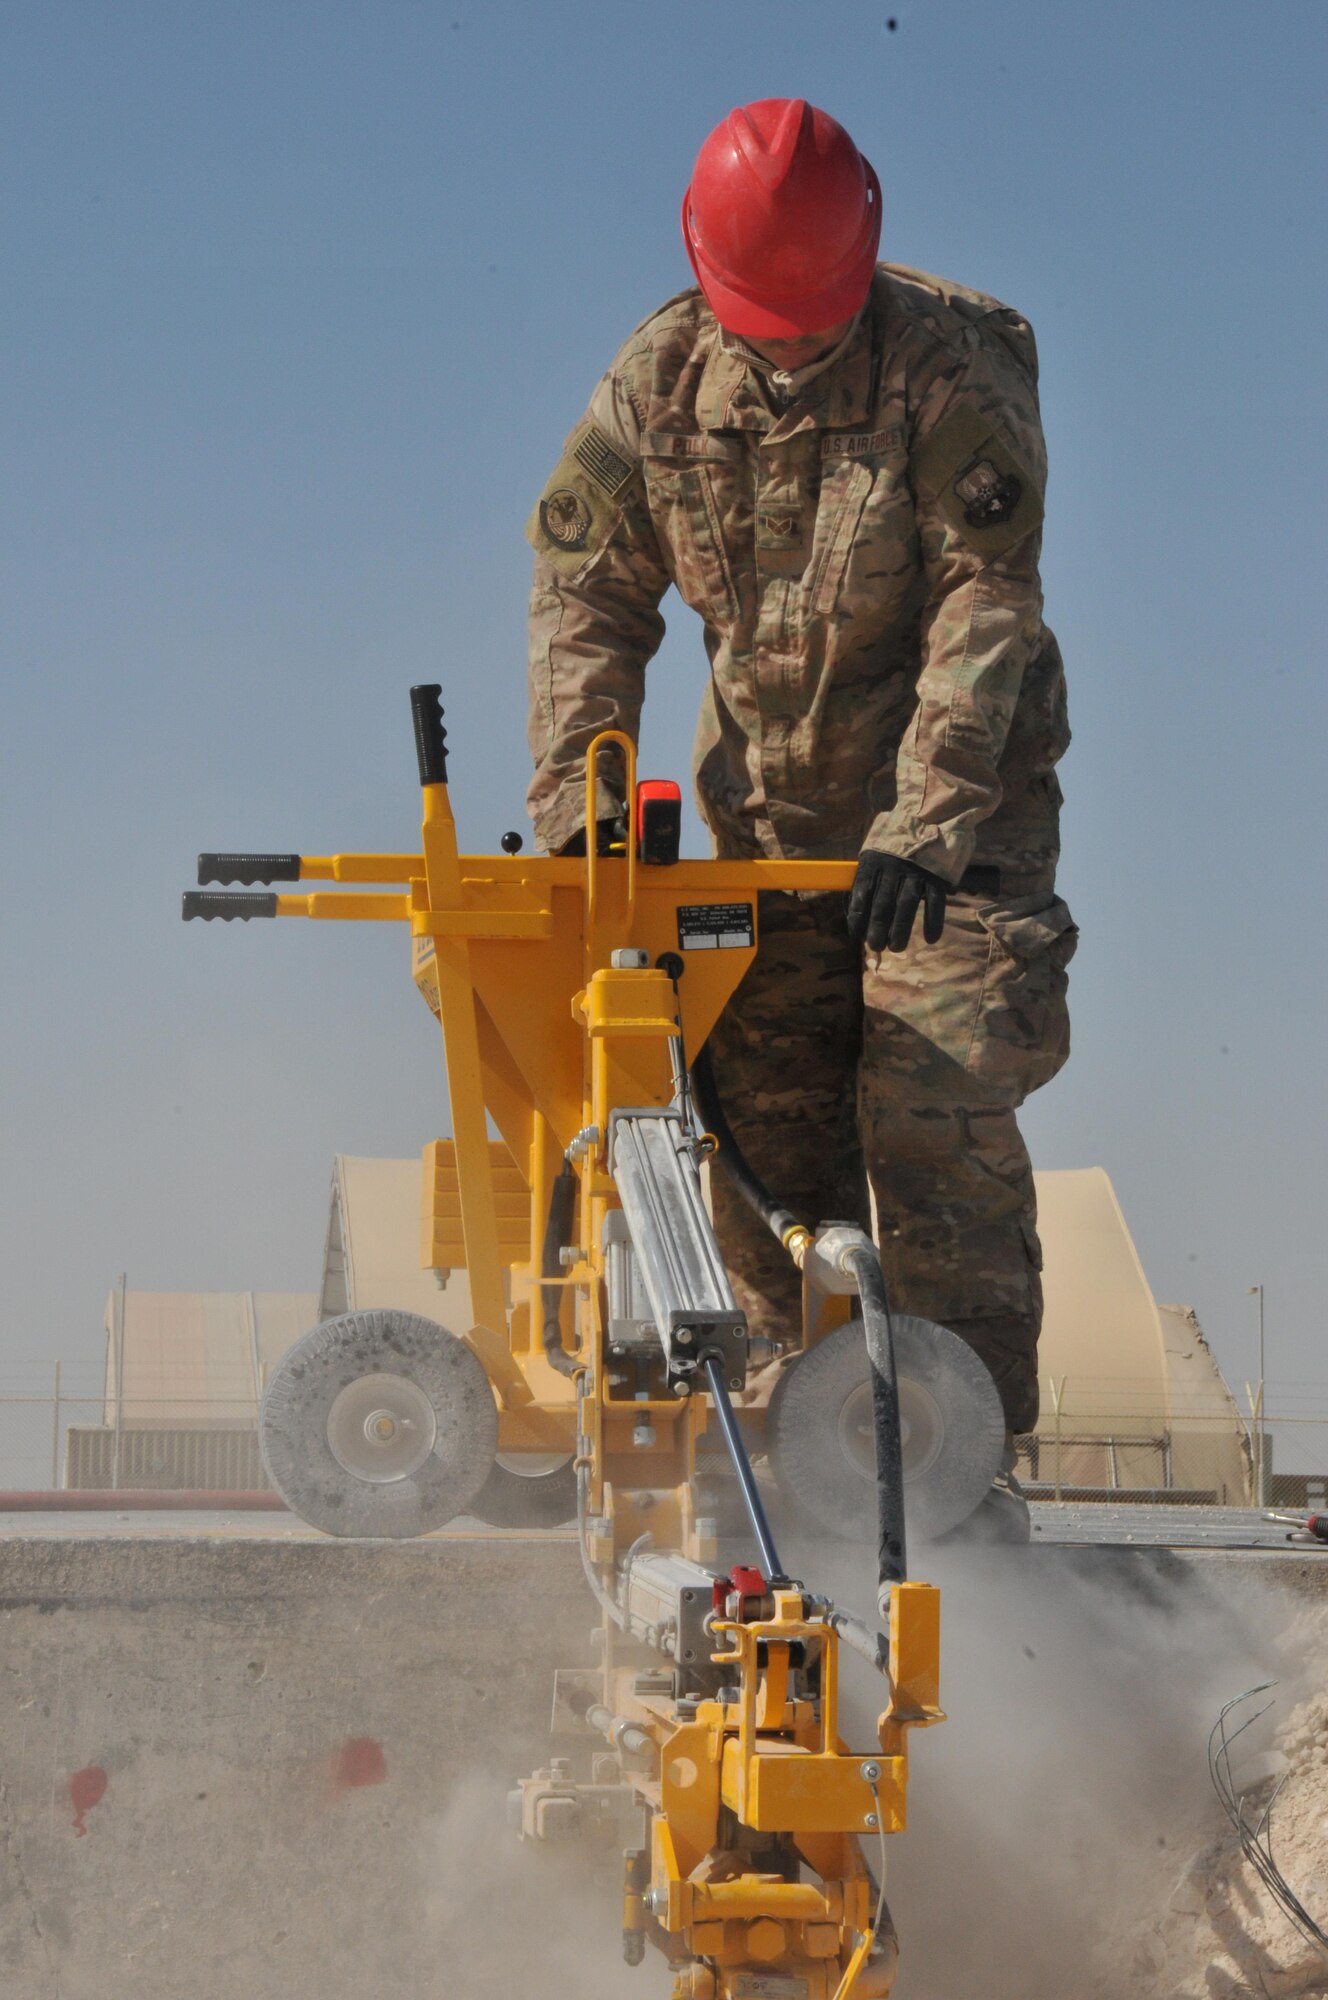 Senior Airman Shawn Polk, 557th Rapid Engineer Deployable Heavy Operational Repair Squadron Engineer heavy equipment operator, deployed from Malmstrom Air Force Base, Montana, operates an E-Z Drill for dowel placement Jan. 30 at Al Udeid Air Base, Qatar. Engineers use dowels between each slab of concrete to help dispense the concrete and support the weight of the aircraft on the ramp. (U.S. Air Force photo by Tech. Sgt. Terrica Y. Jones/Released)